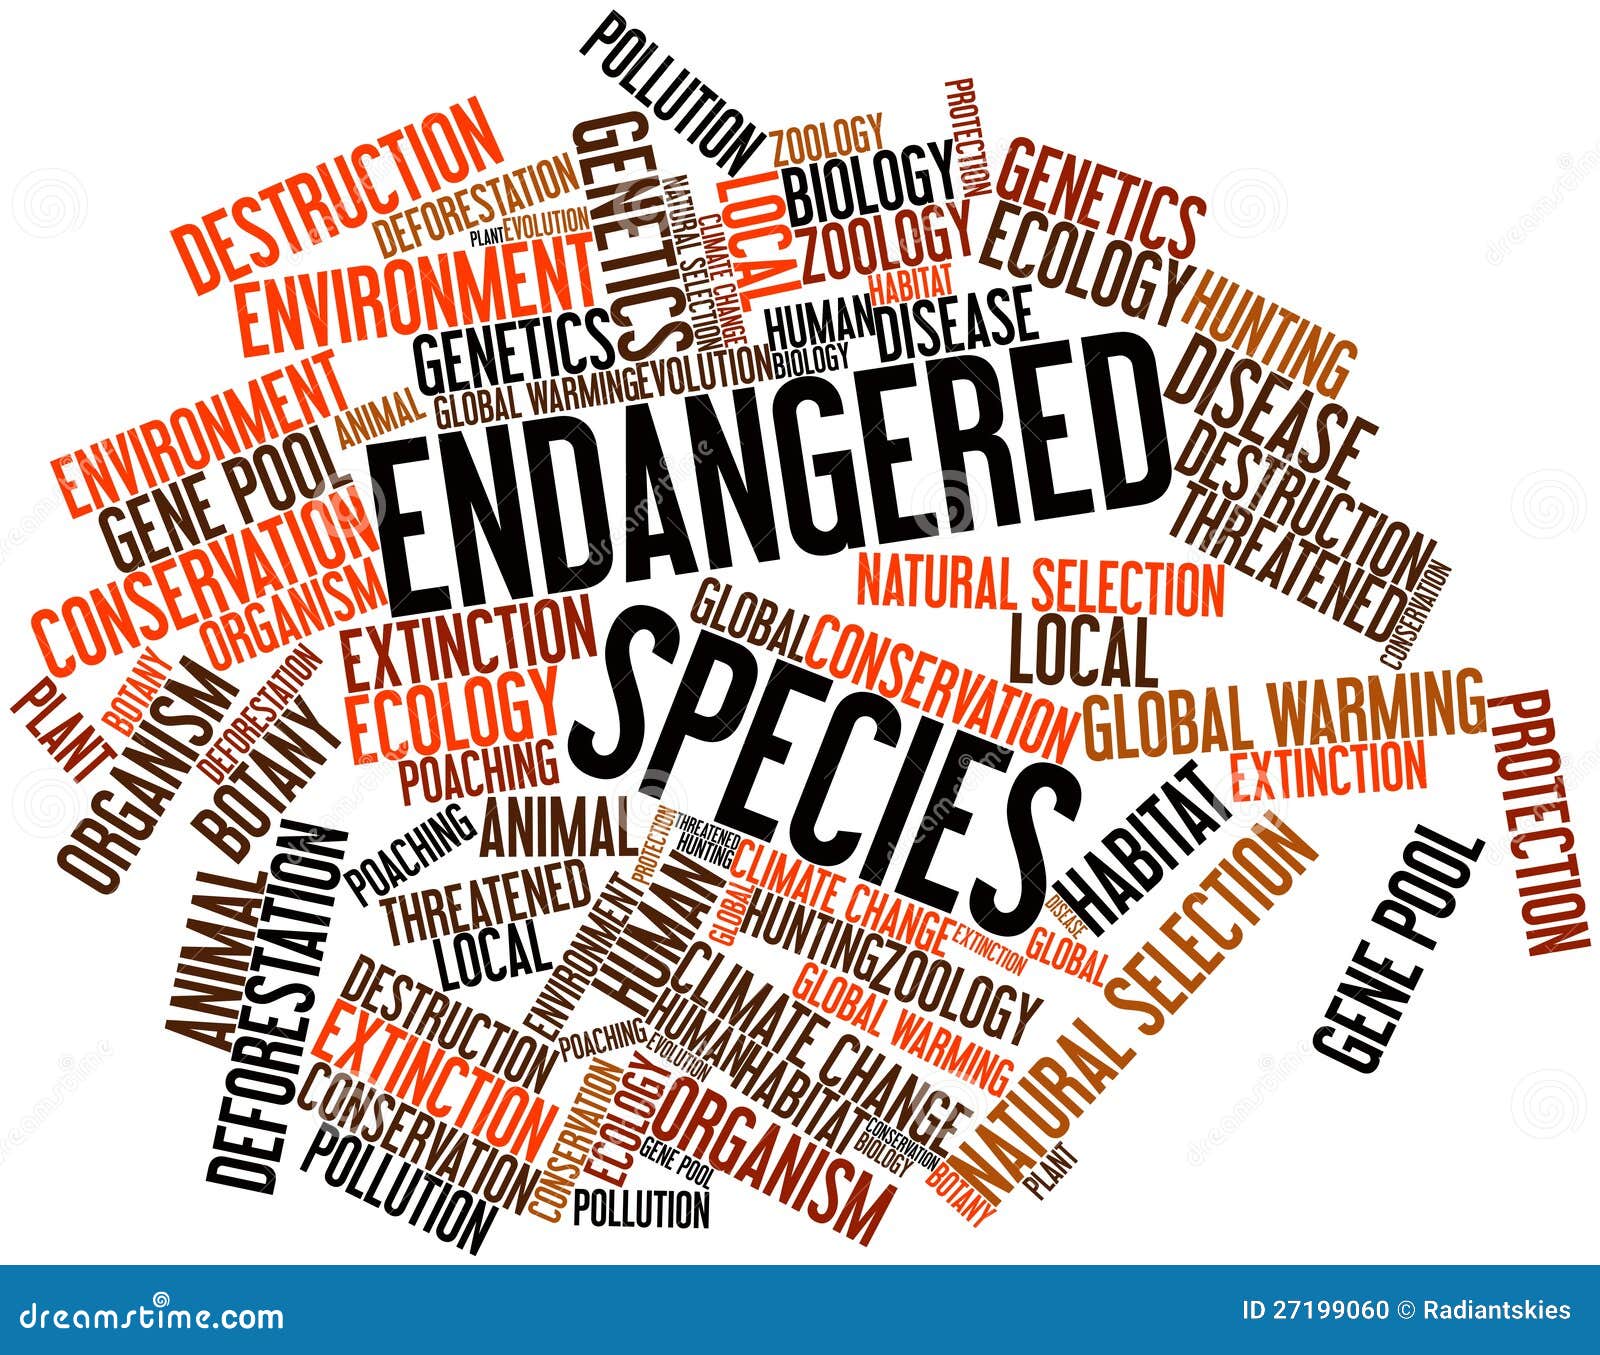 Project Statement & Summary - Endangered Species PSA